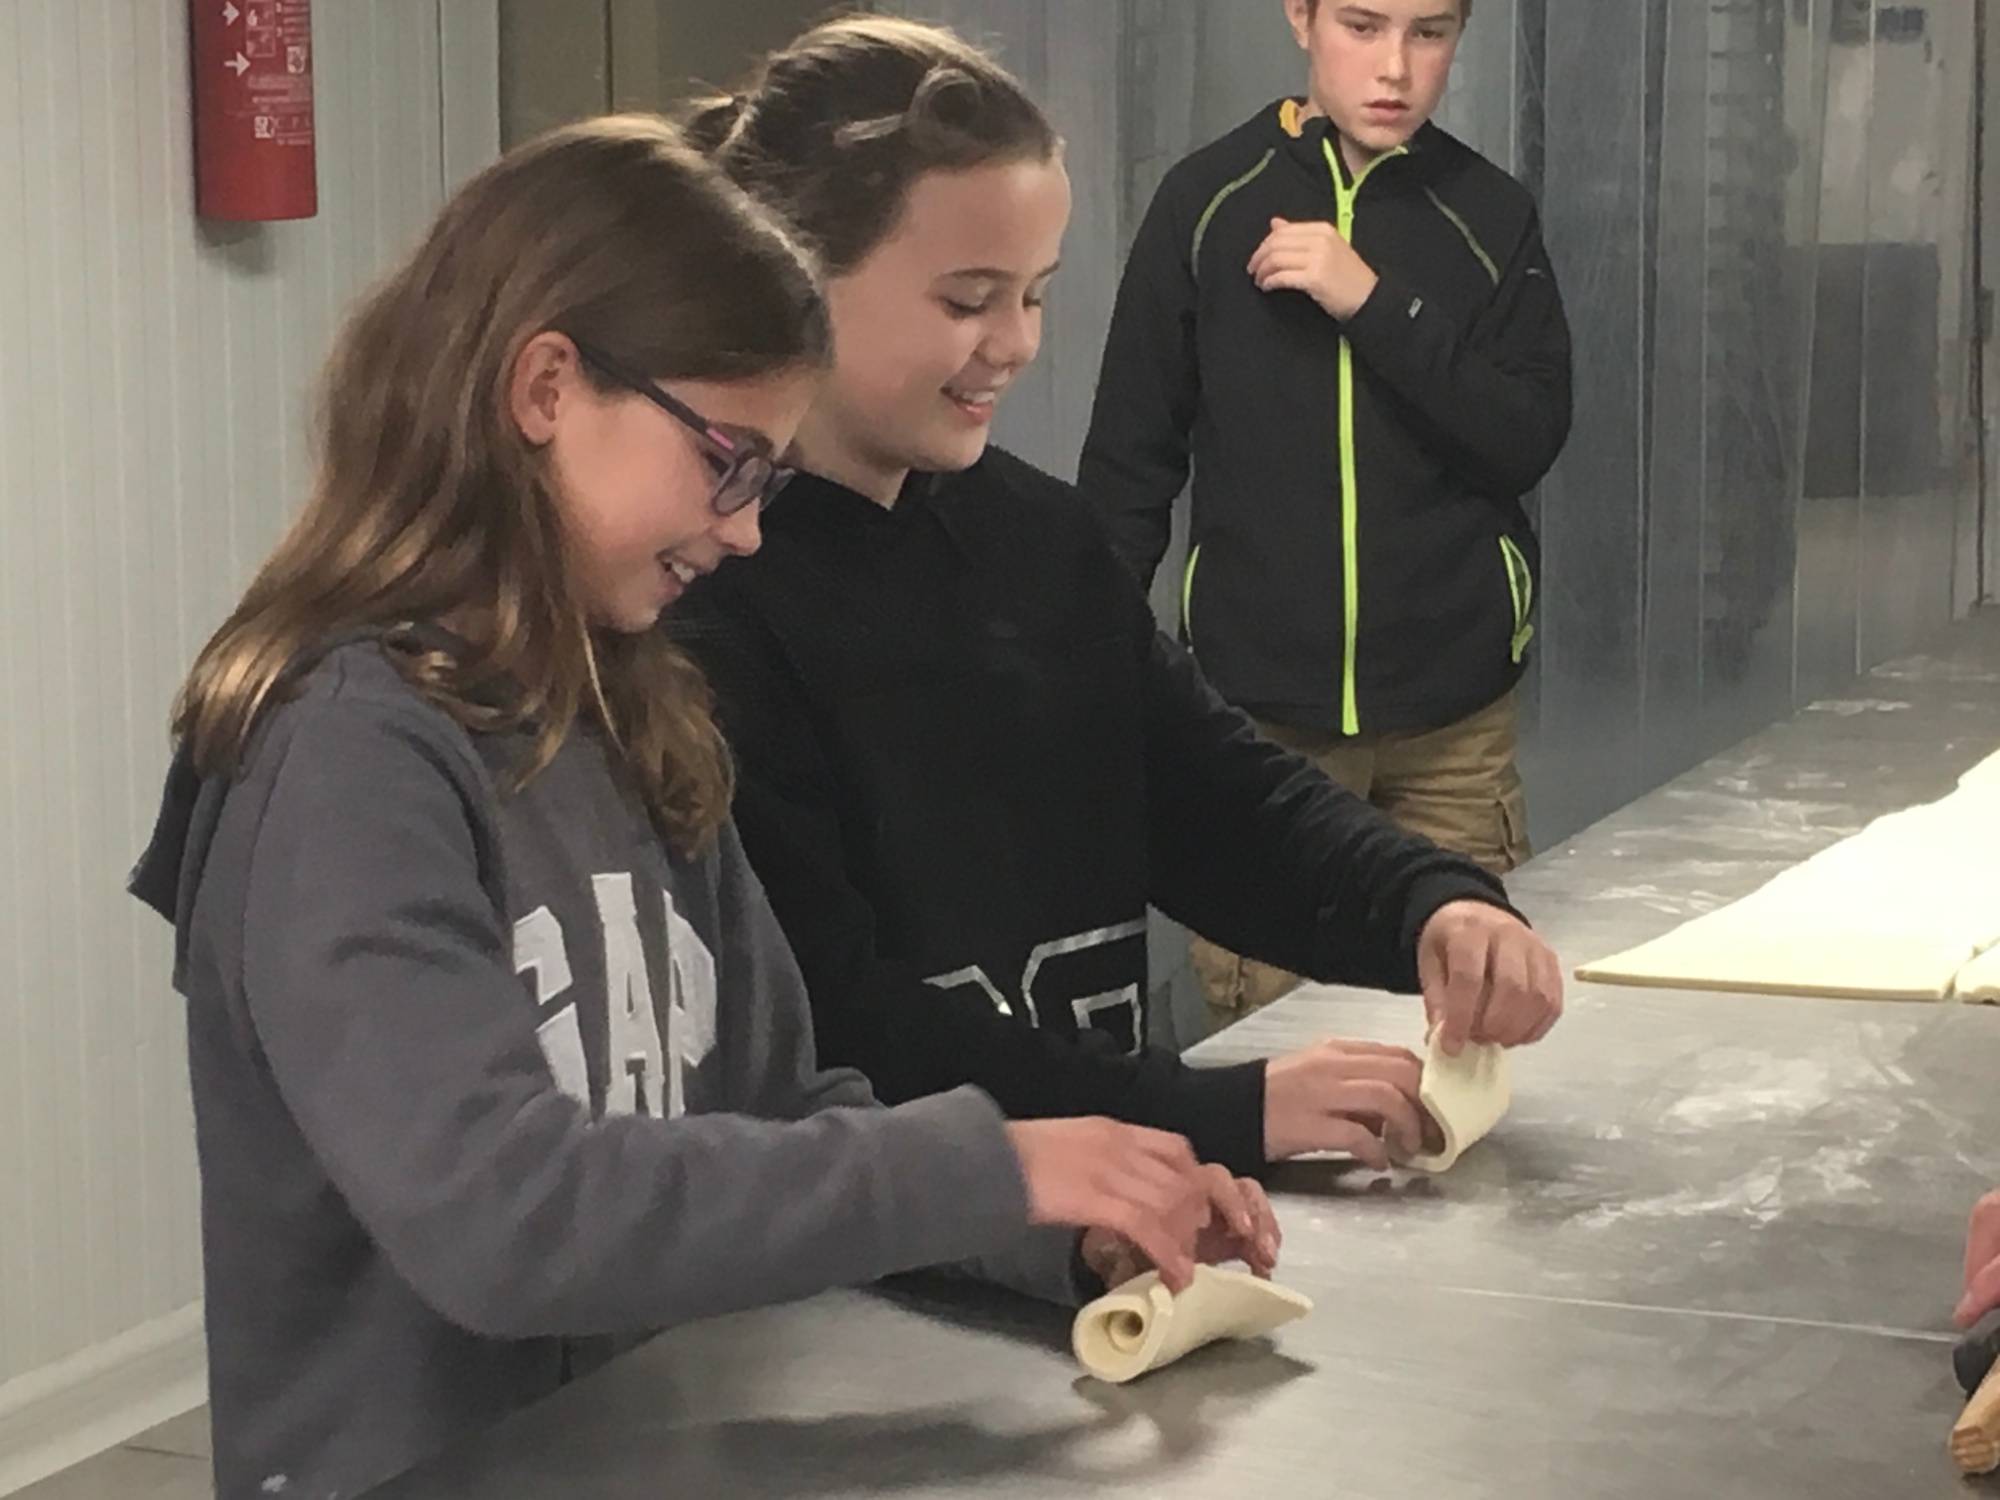 Students make croissants in France